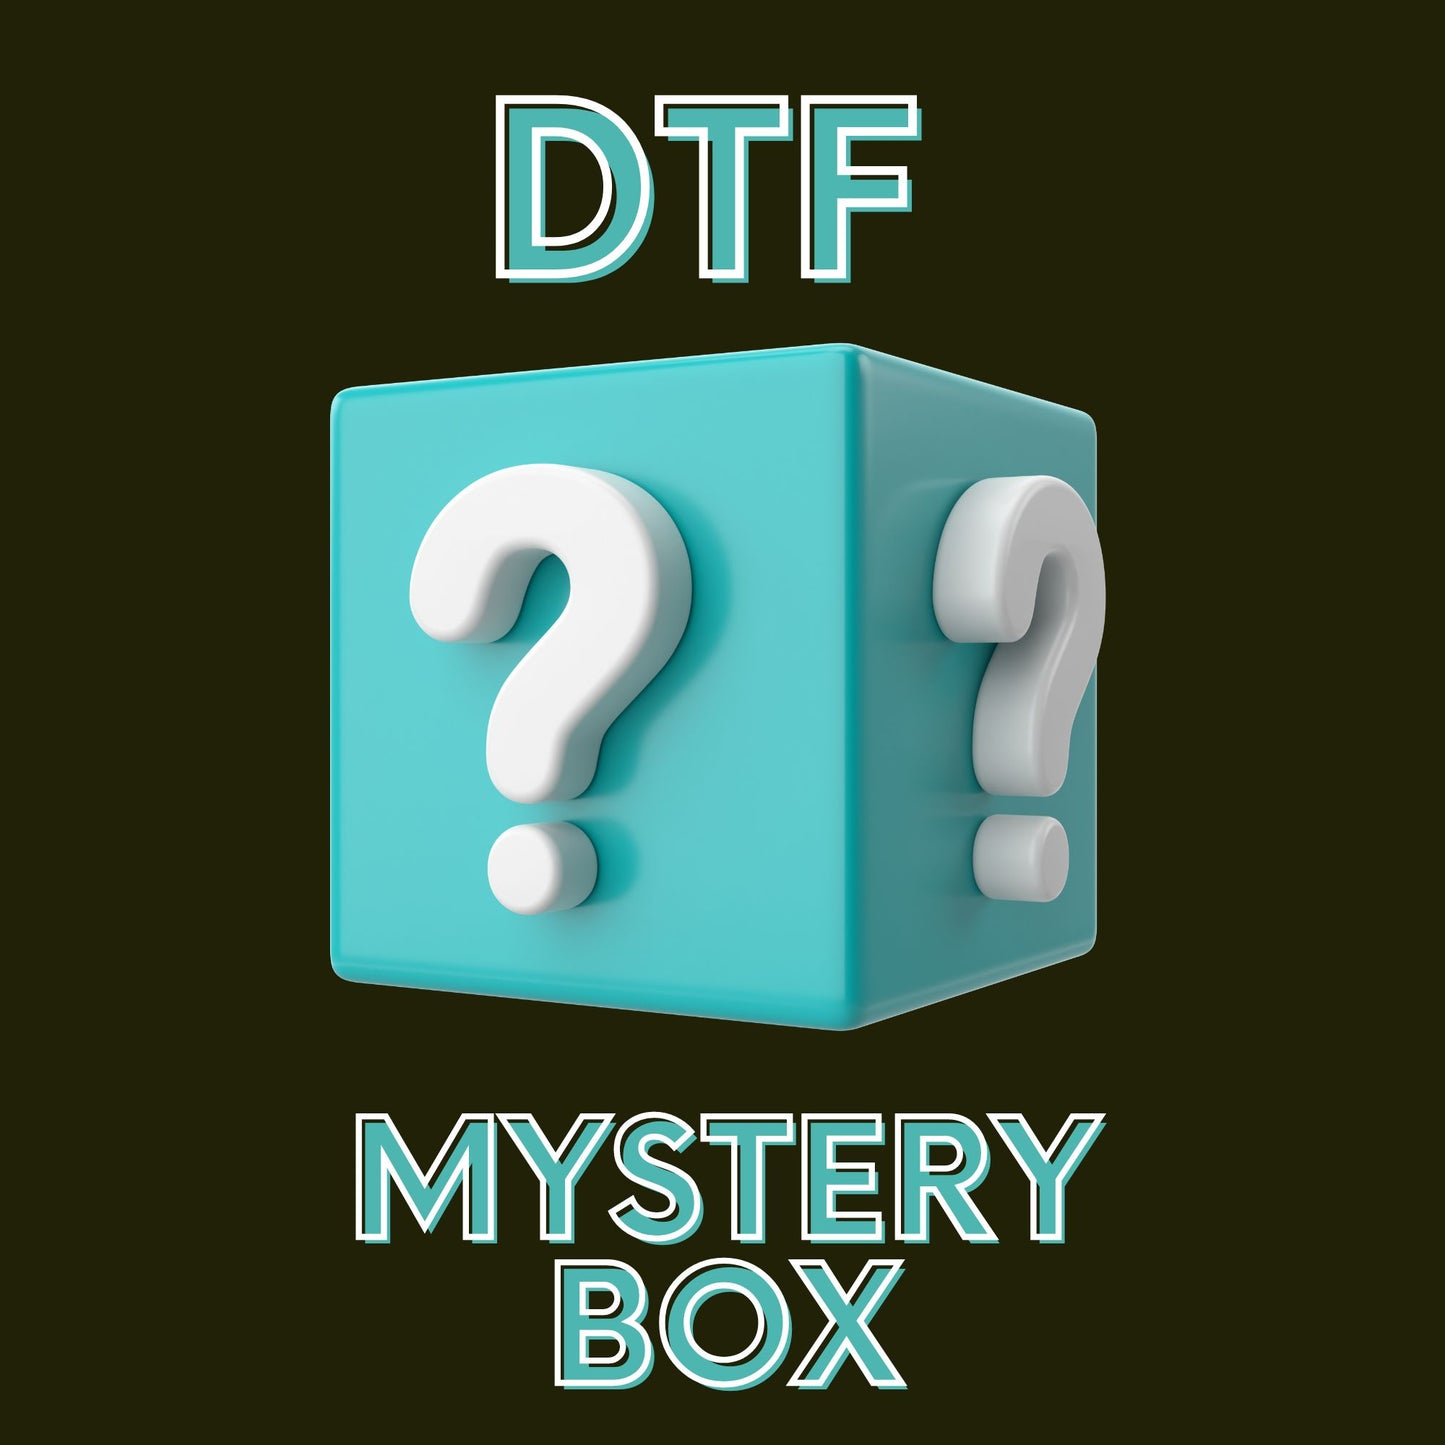 UV DTF Decal Mystery Box- 10 Decals